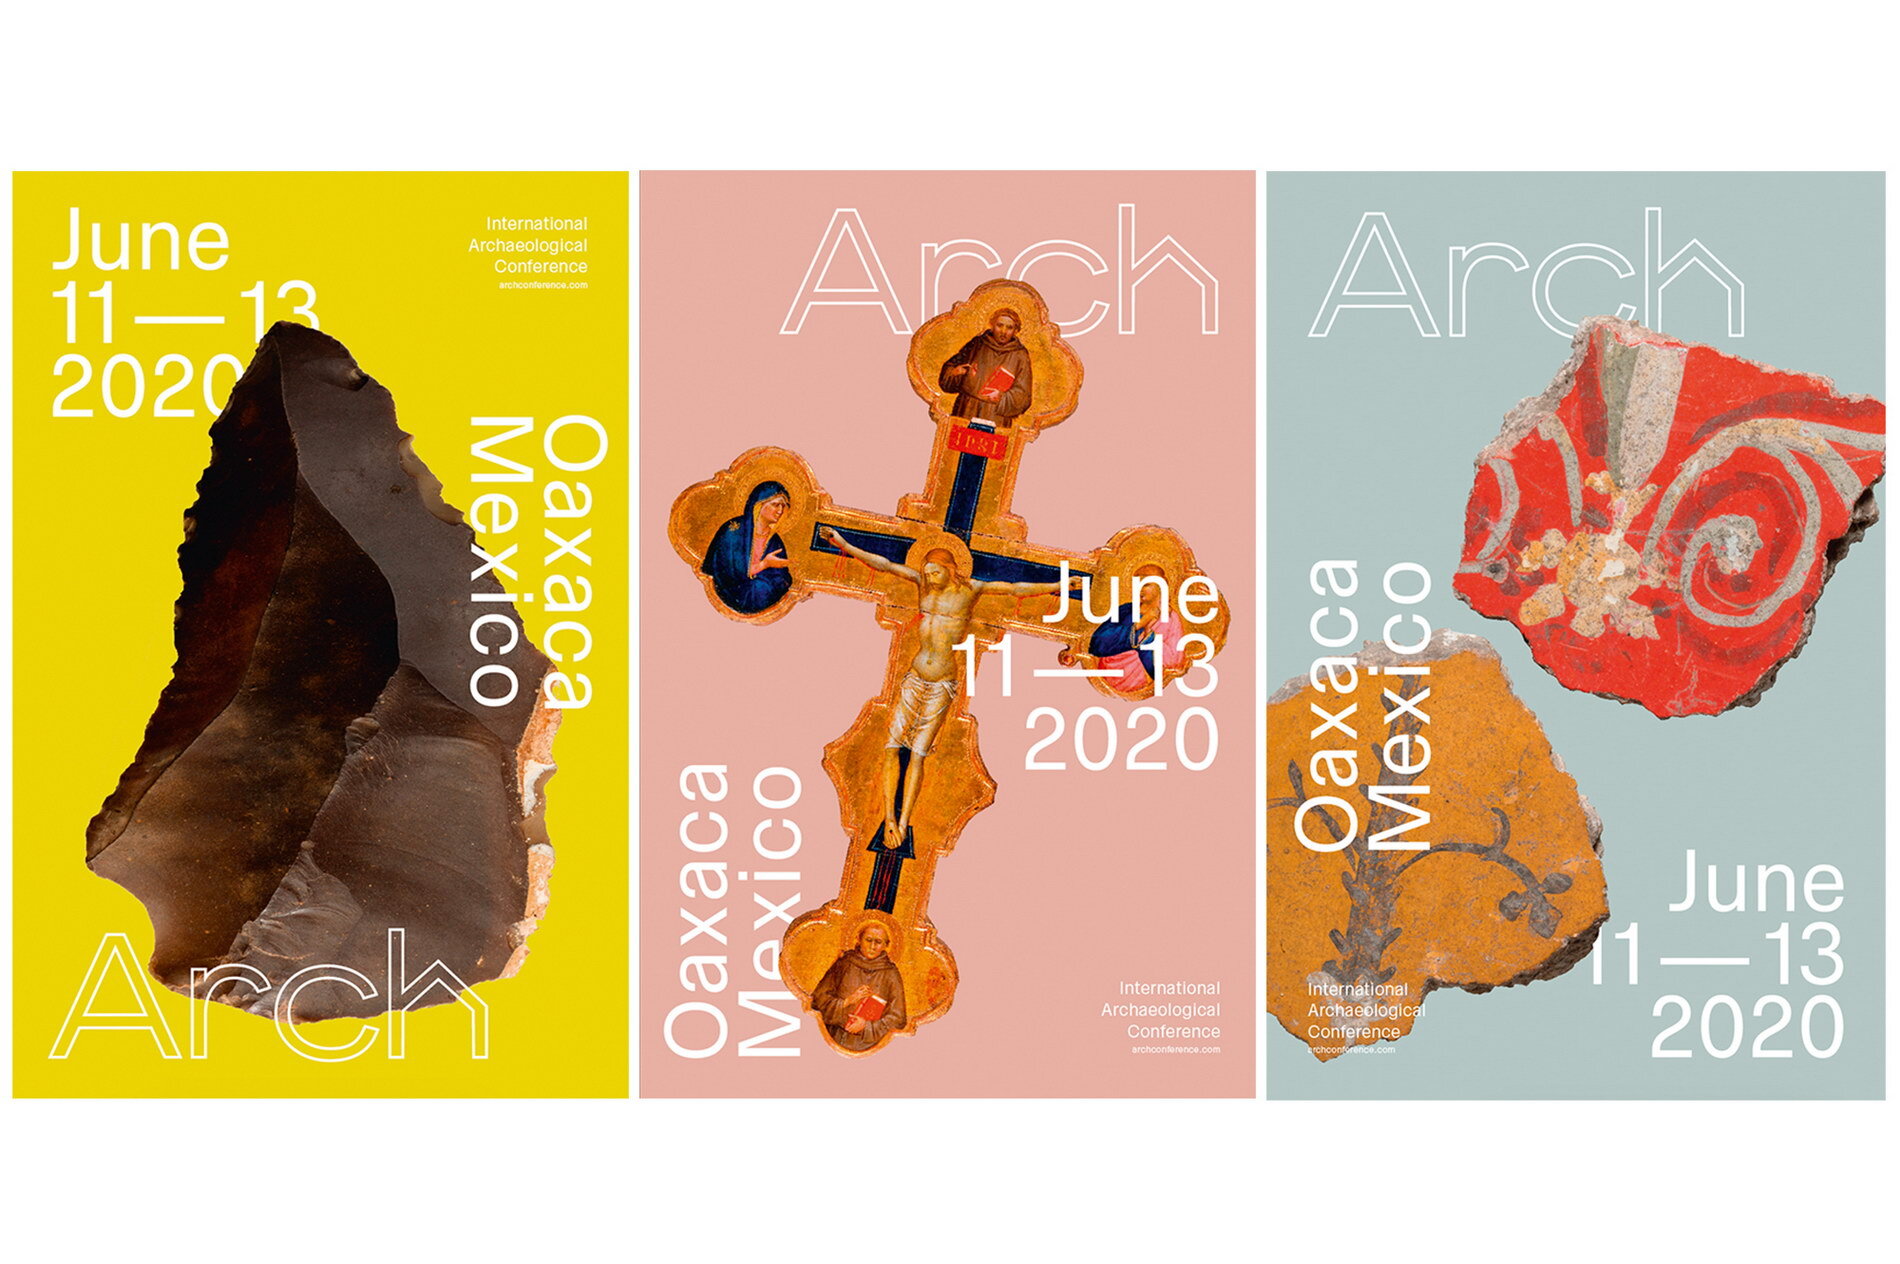  The set of promotional posters showcases the adapting field through typography that responds to the artifacts they feature. 